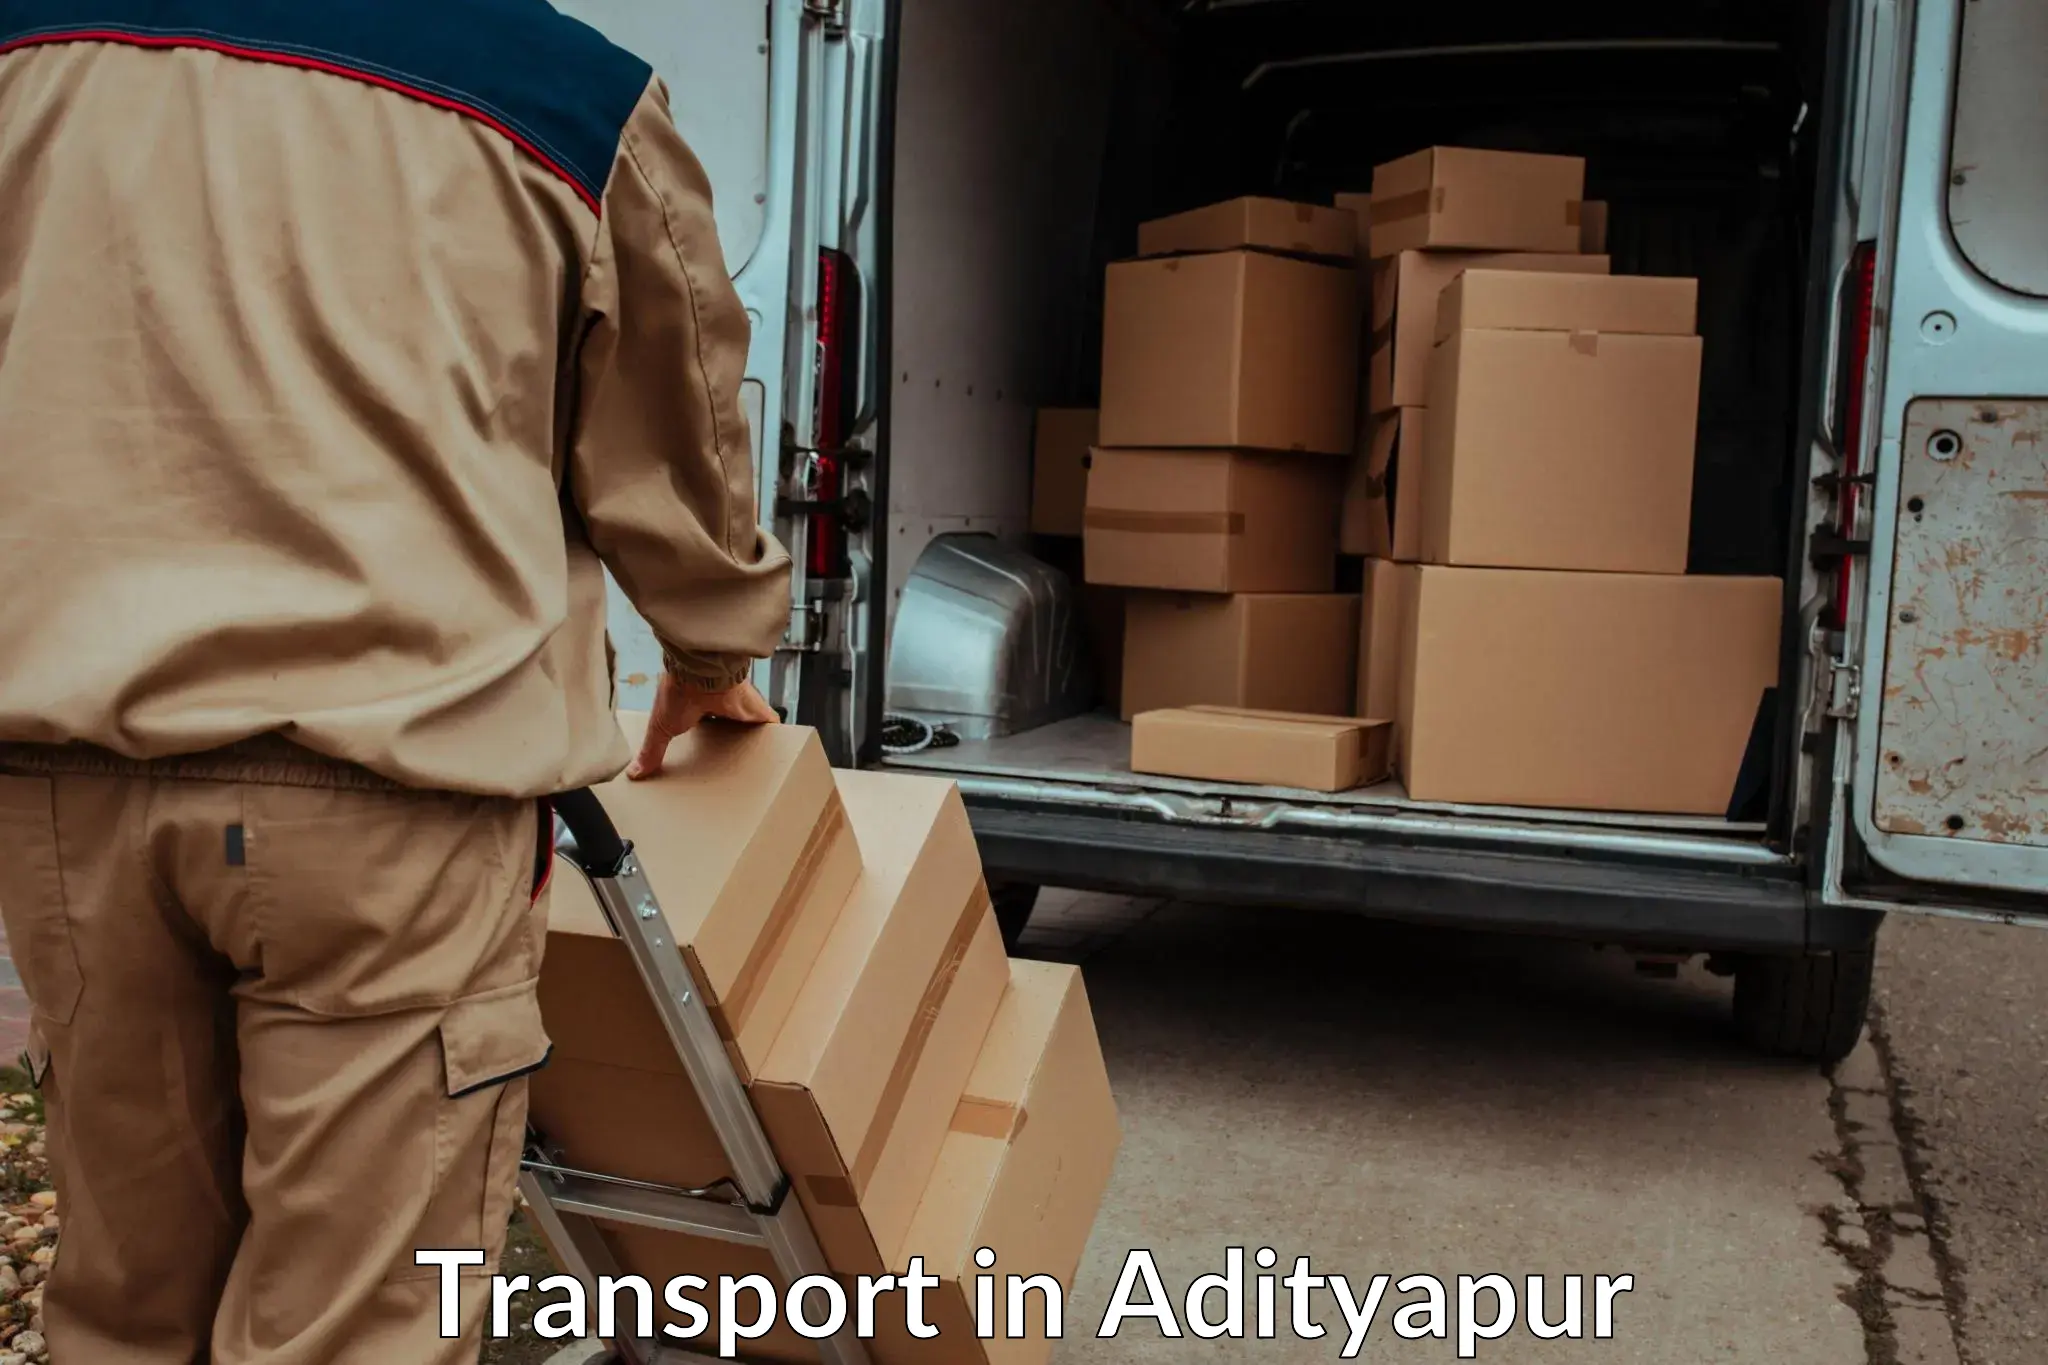 Vehicle transport services in Adityapur